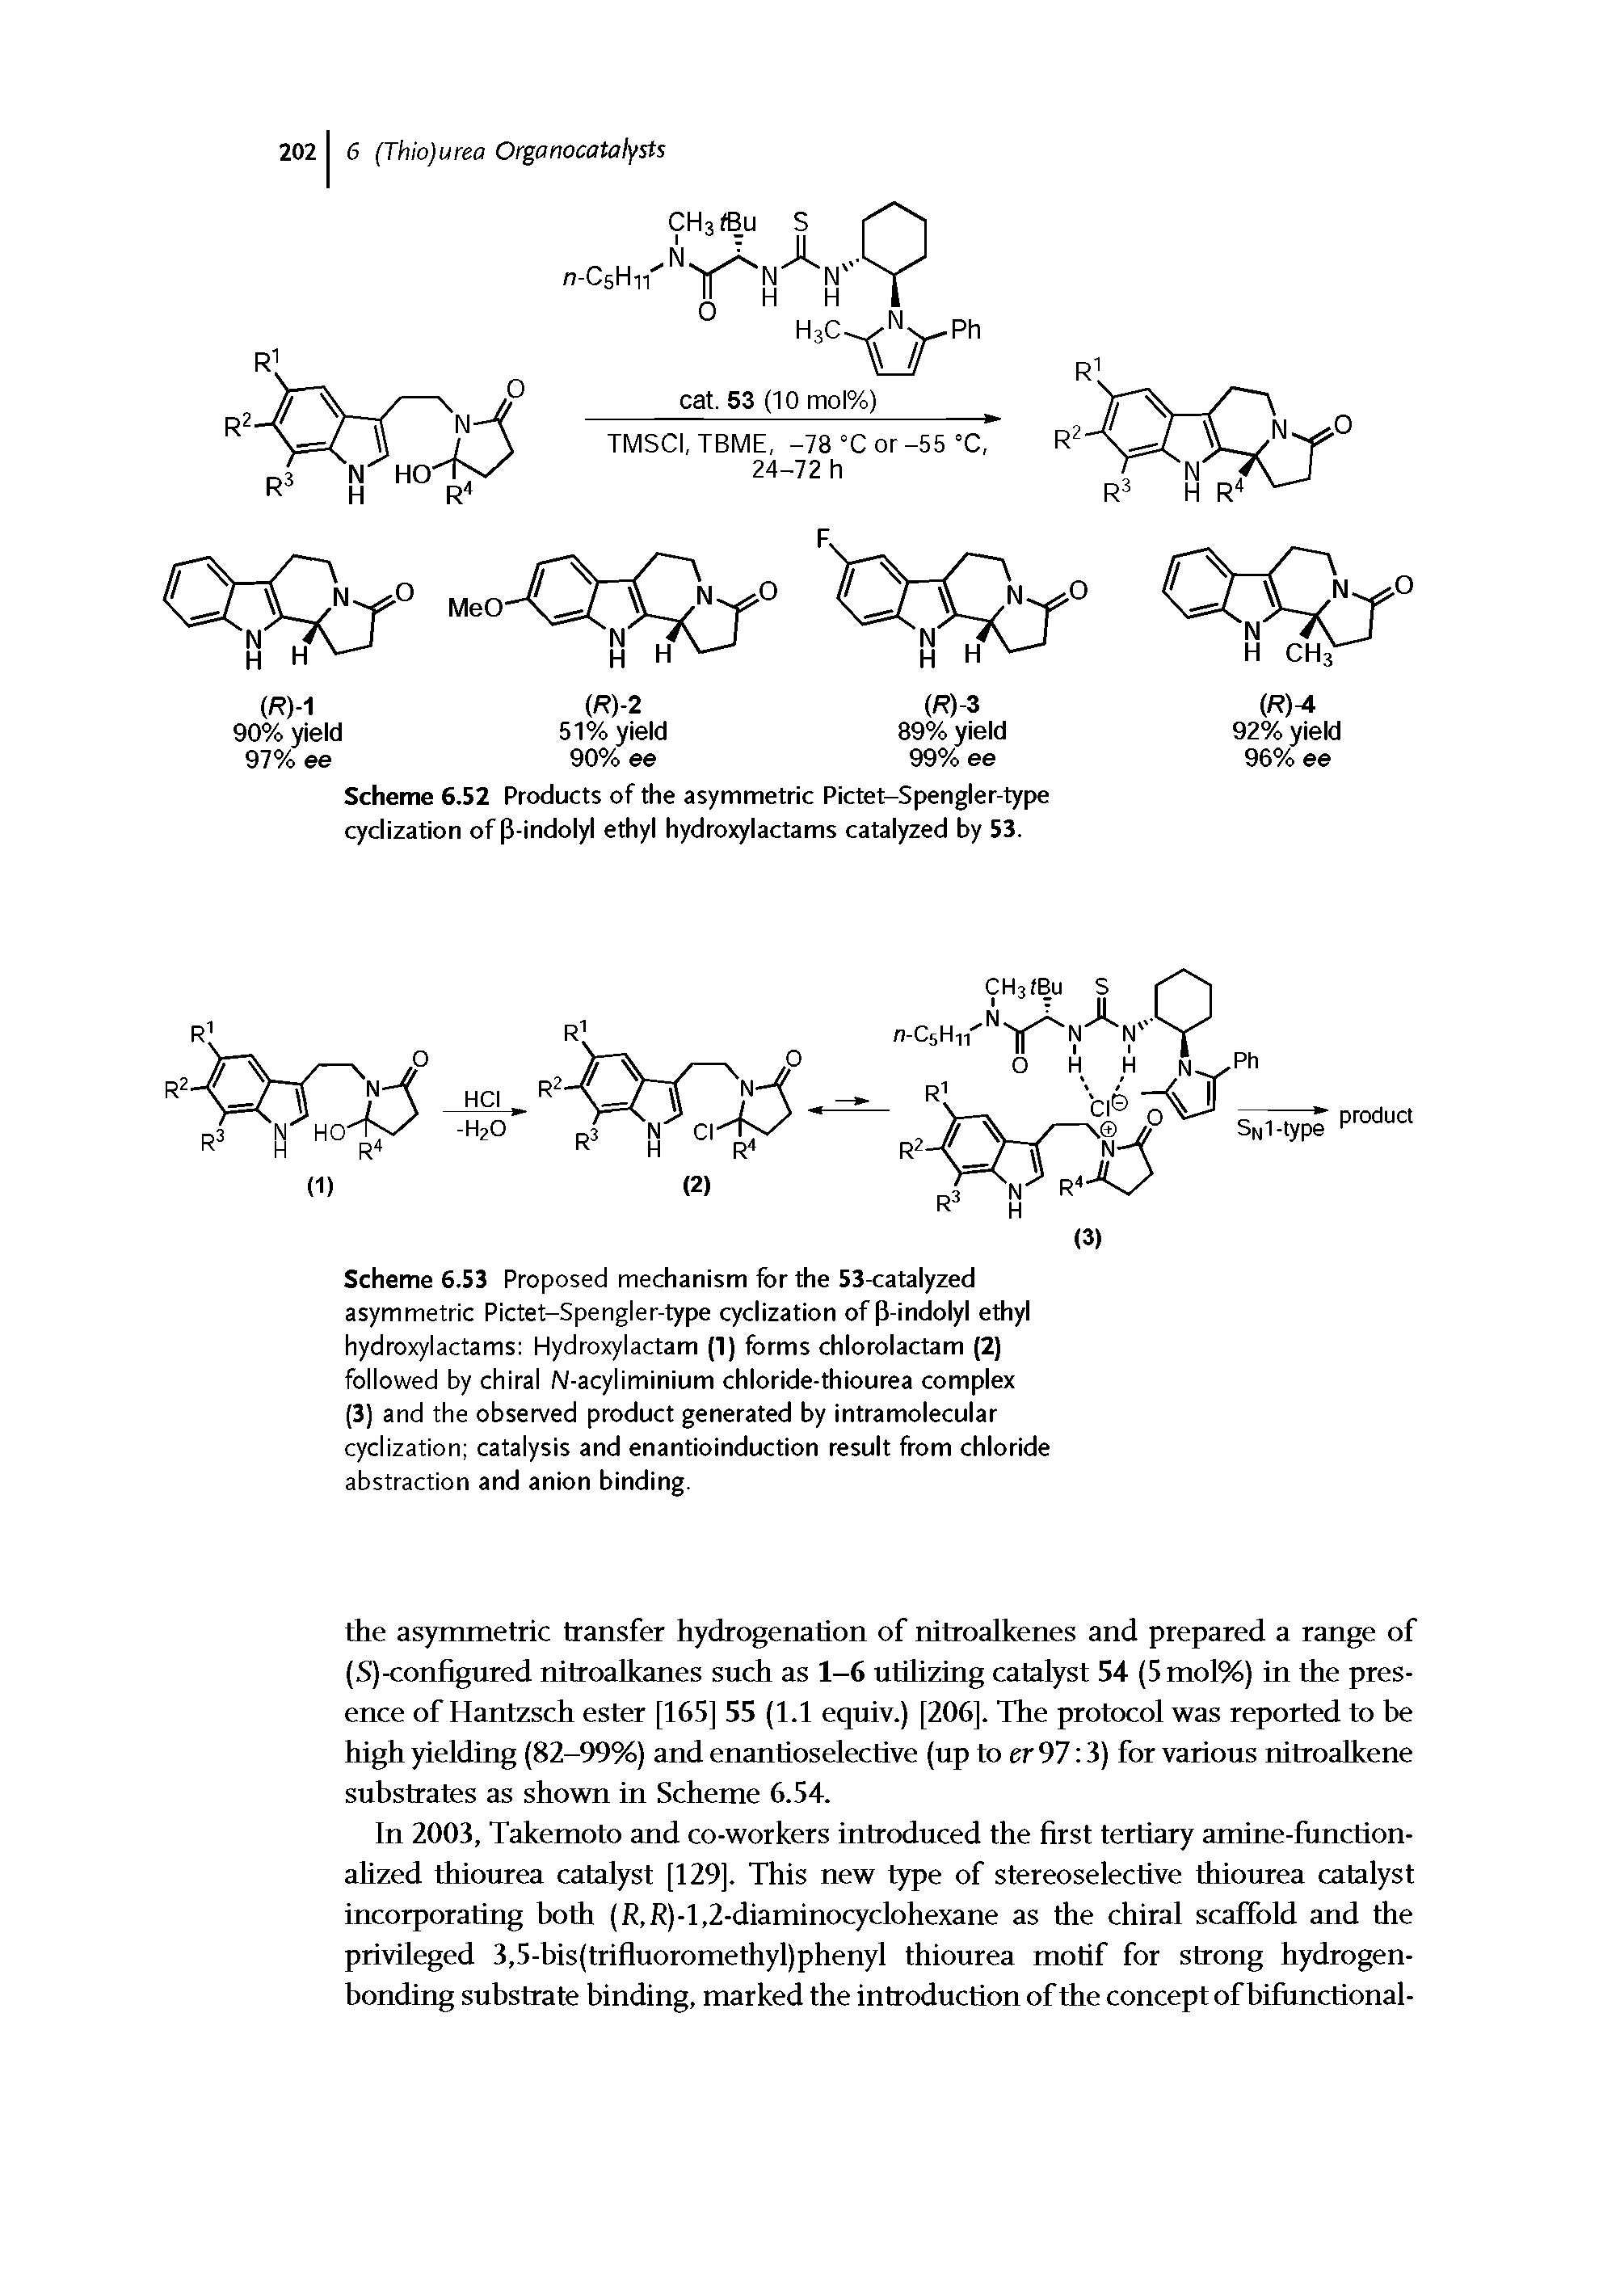 Scheme 6.53 Proposed mechanism for the 53-catalyzed asymmetric Pictet-Spengler-type cyclization of P-indolyl ethyl hydroxylactams Hydroxylactam (1) forms chlorolactam (2) followed by chiral N-acyliminium chloride-thiourea complex (3) and the observed product generated by intramolecular cyclization catalysis and enantioinduction result from chloride abstraction and anion binding.